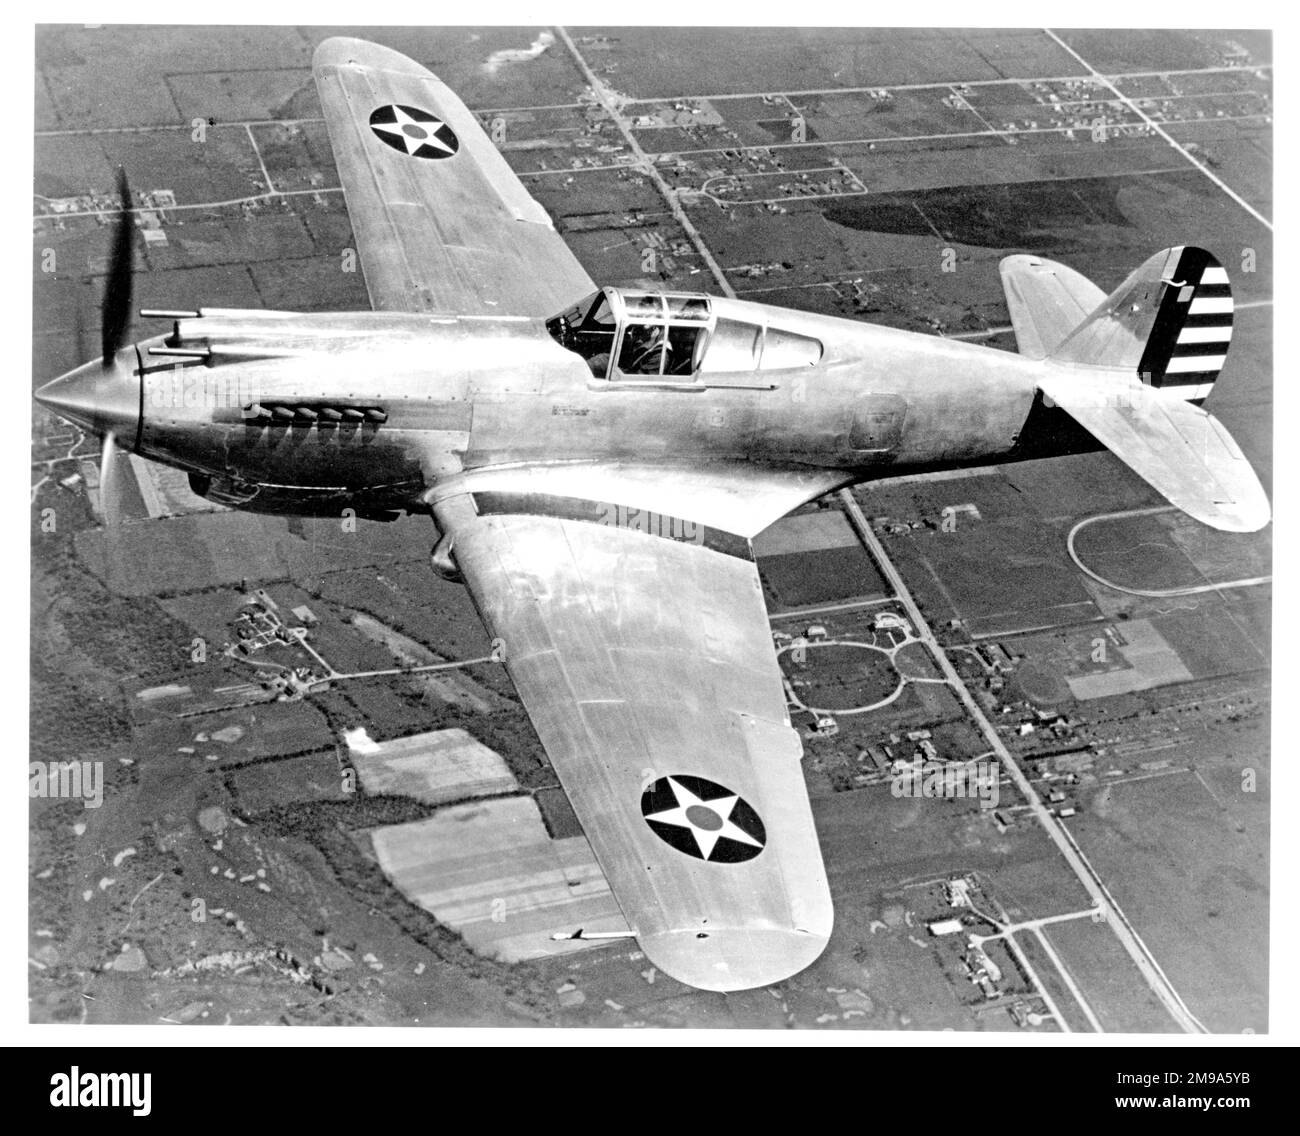 United States Army Air Corps (USAAC) - Curtiss P-40 (Model 81). The first production standard, delivered with the stars and stripes on both wings, unusually. This could possibly be the XP-40 (Model 75P, msn 12424) in its third iteration as the production standard for the P-40 (Model 81). Stock Photo